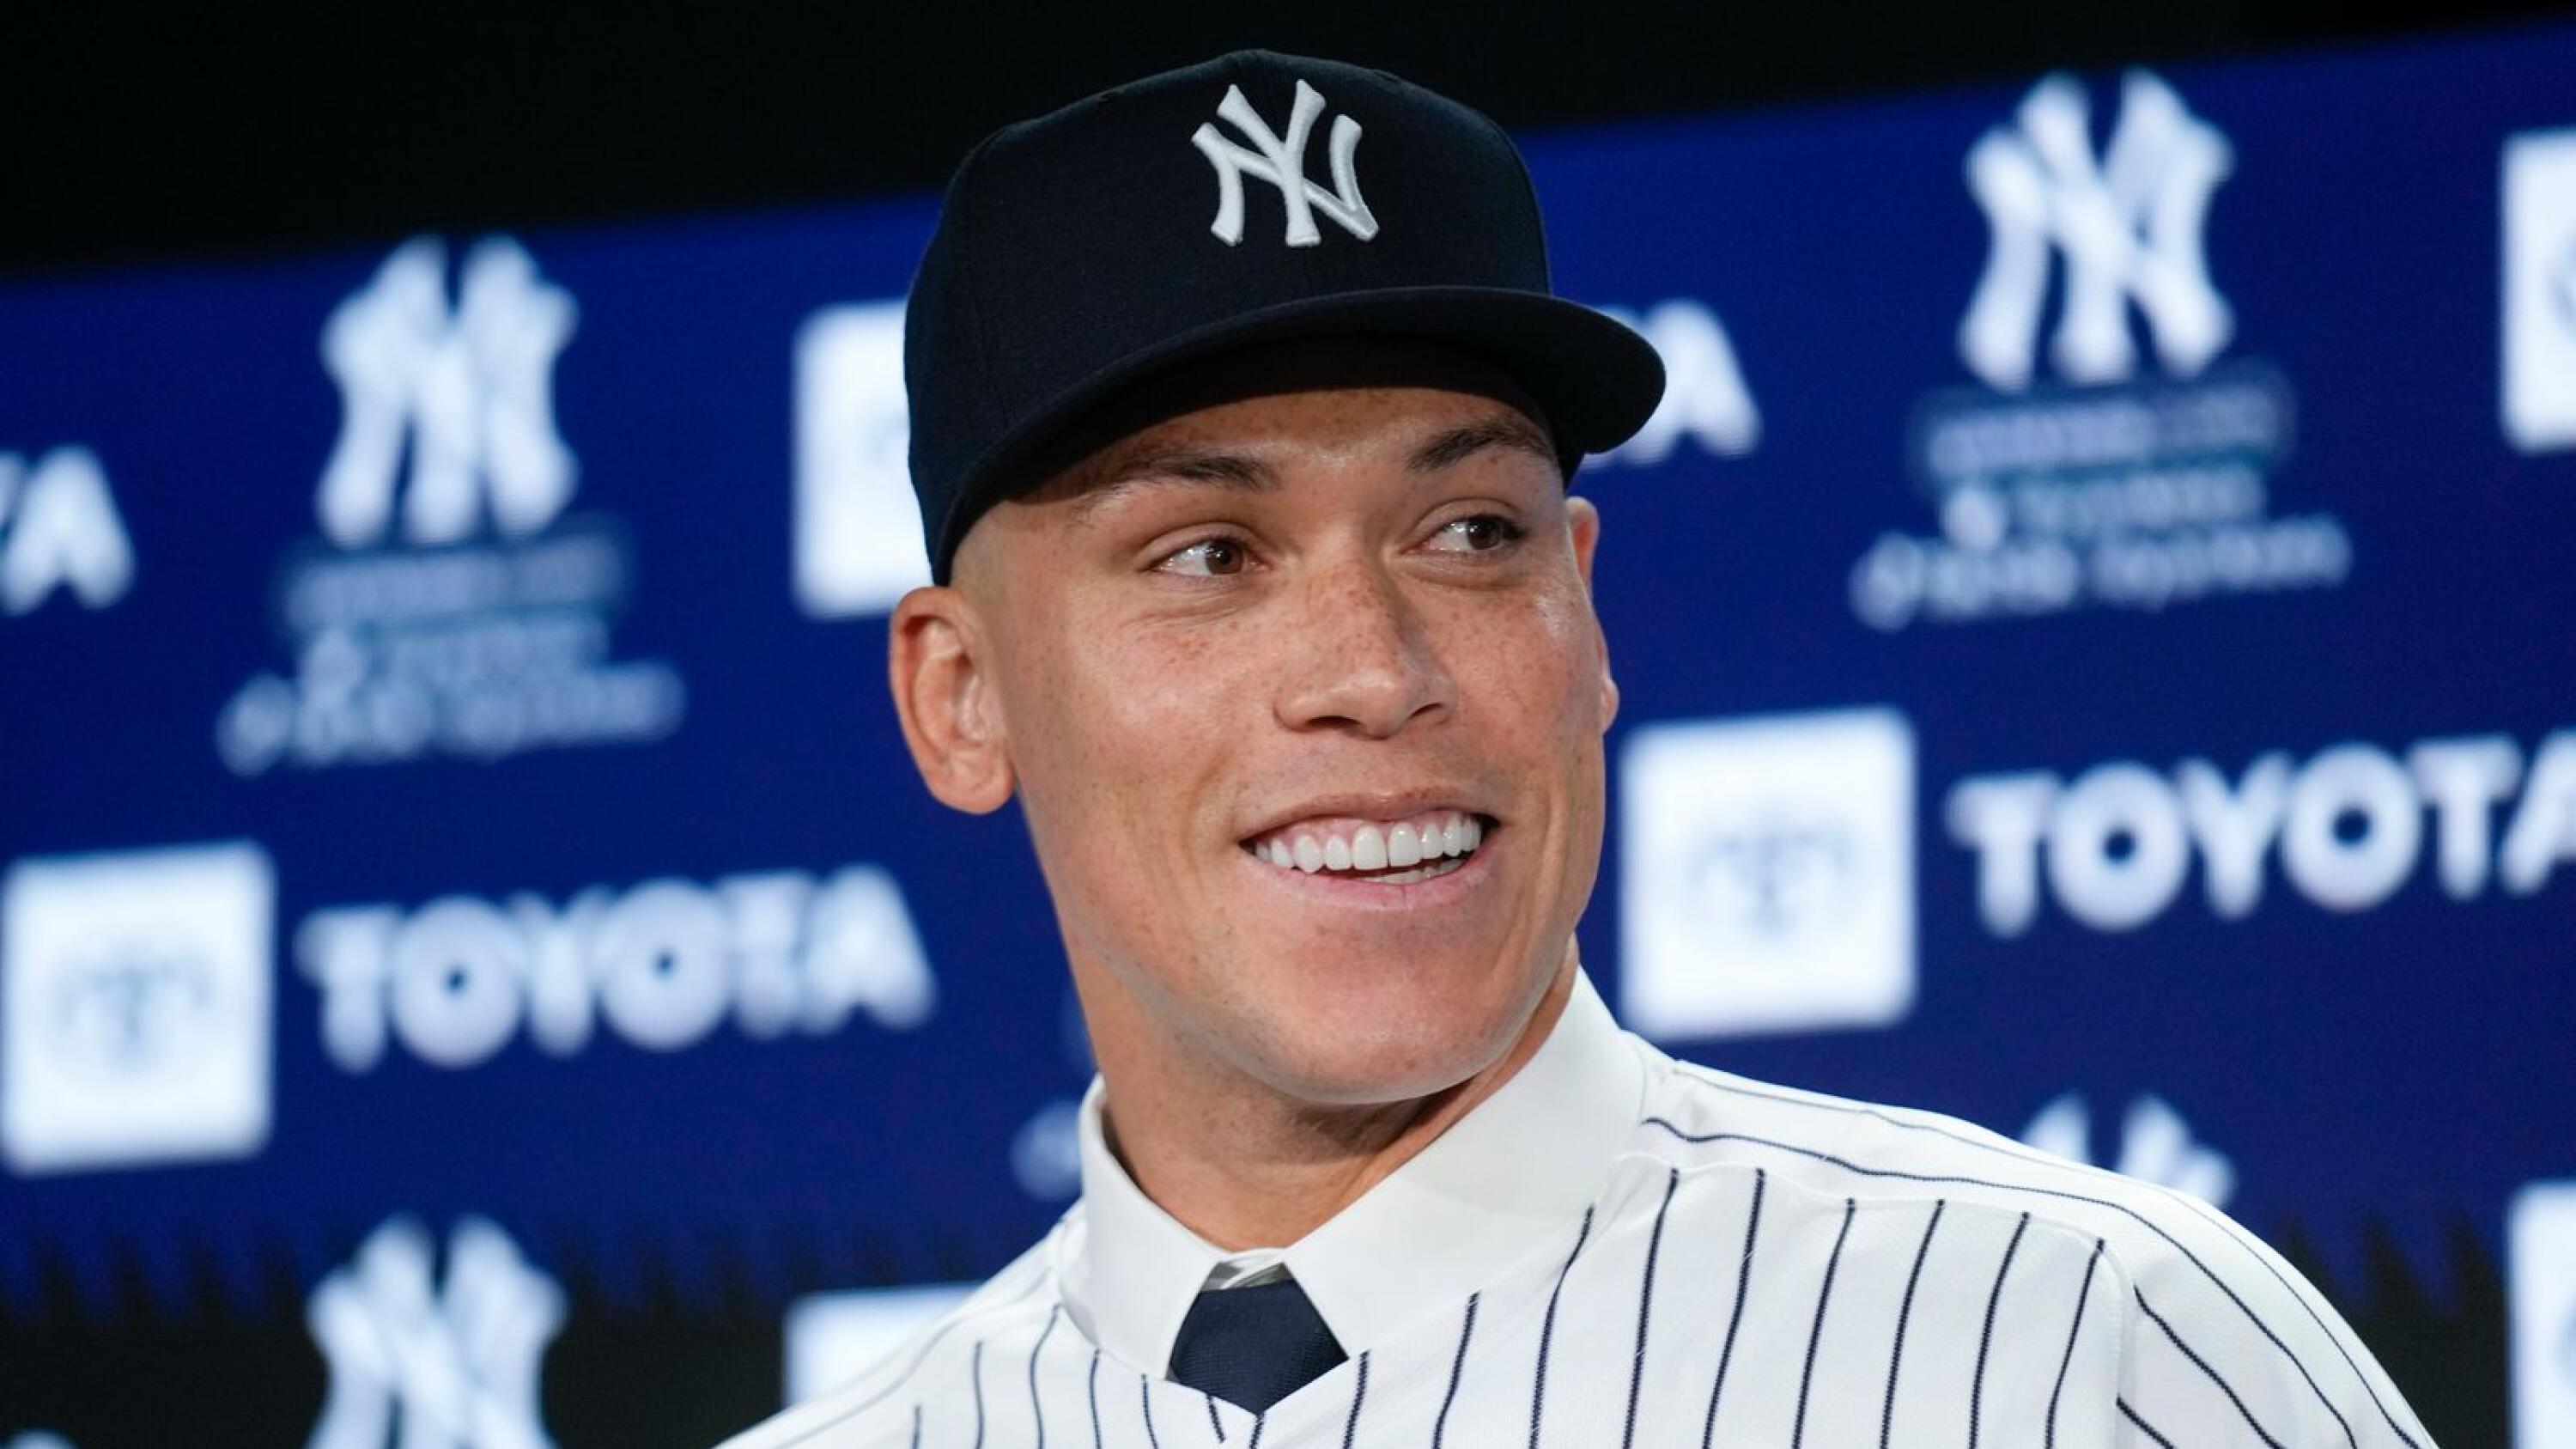 Judge named 16th captain of Yankees at news conference formally announcing  new deal